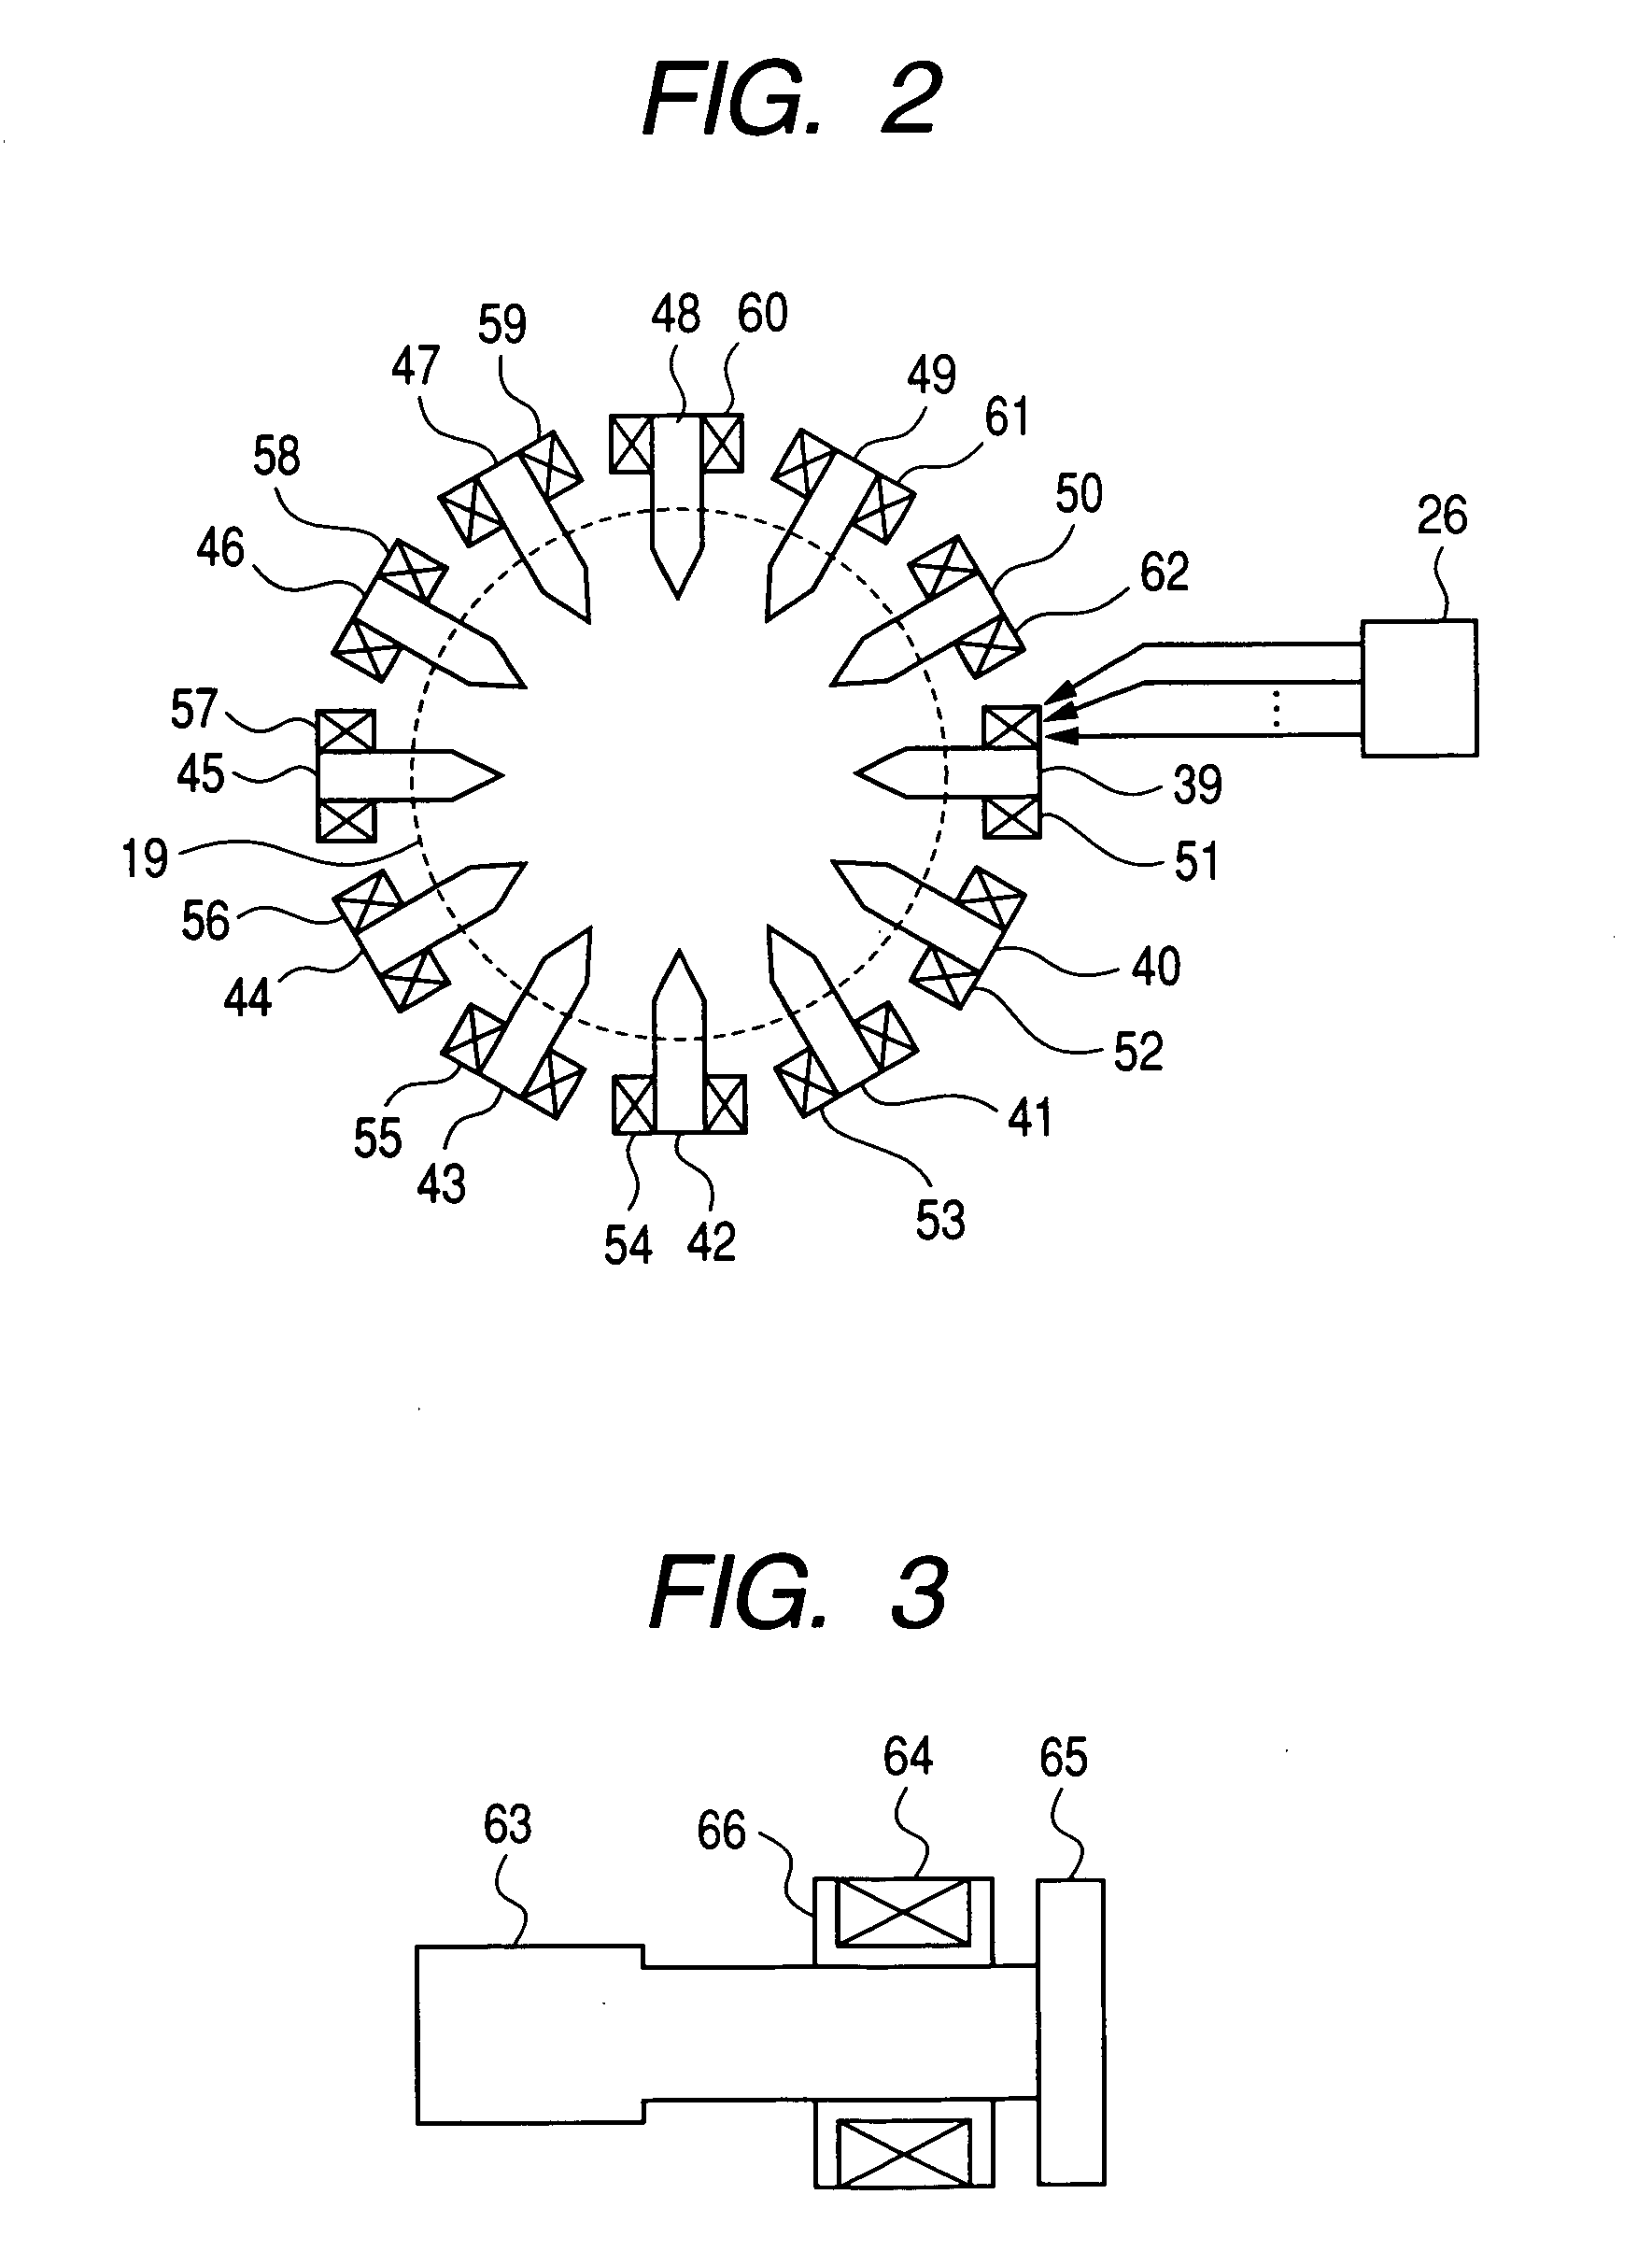 Charged particle optical apparatus with aberration corrector